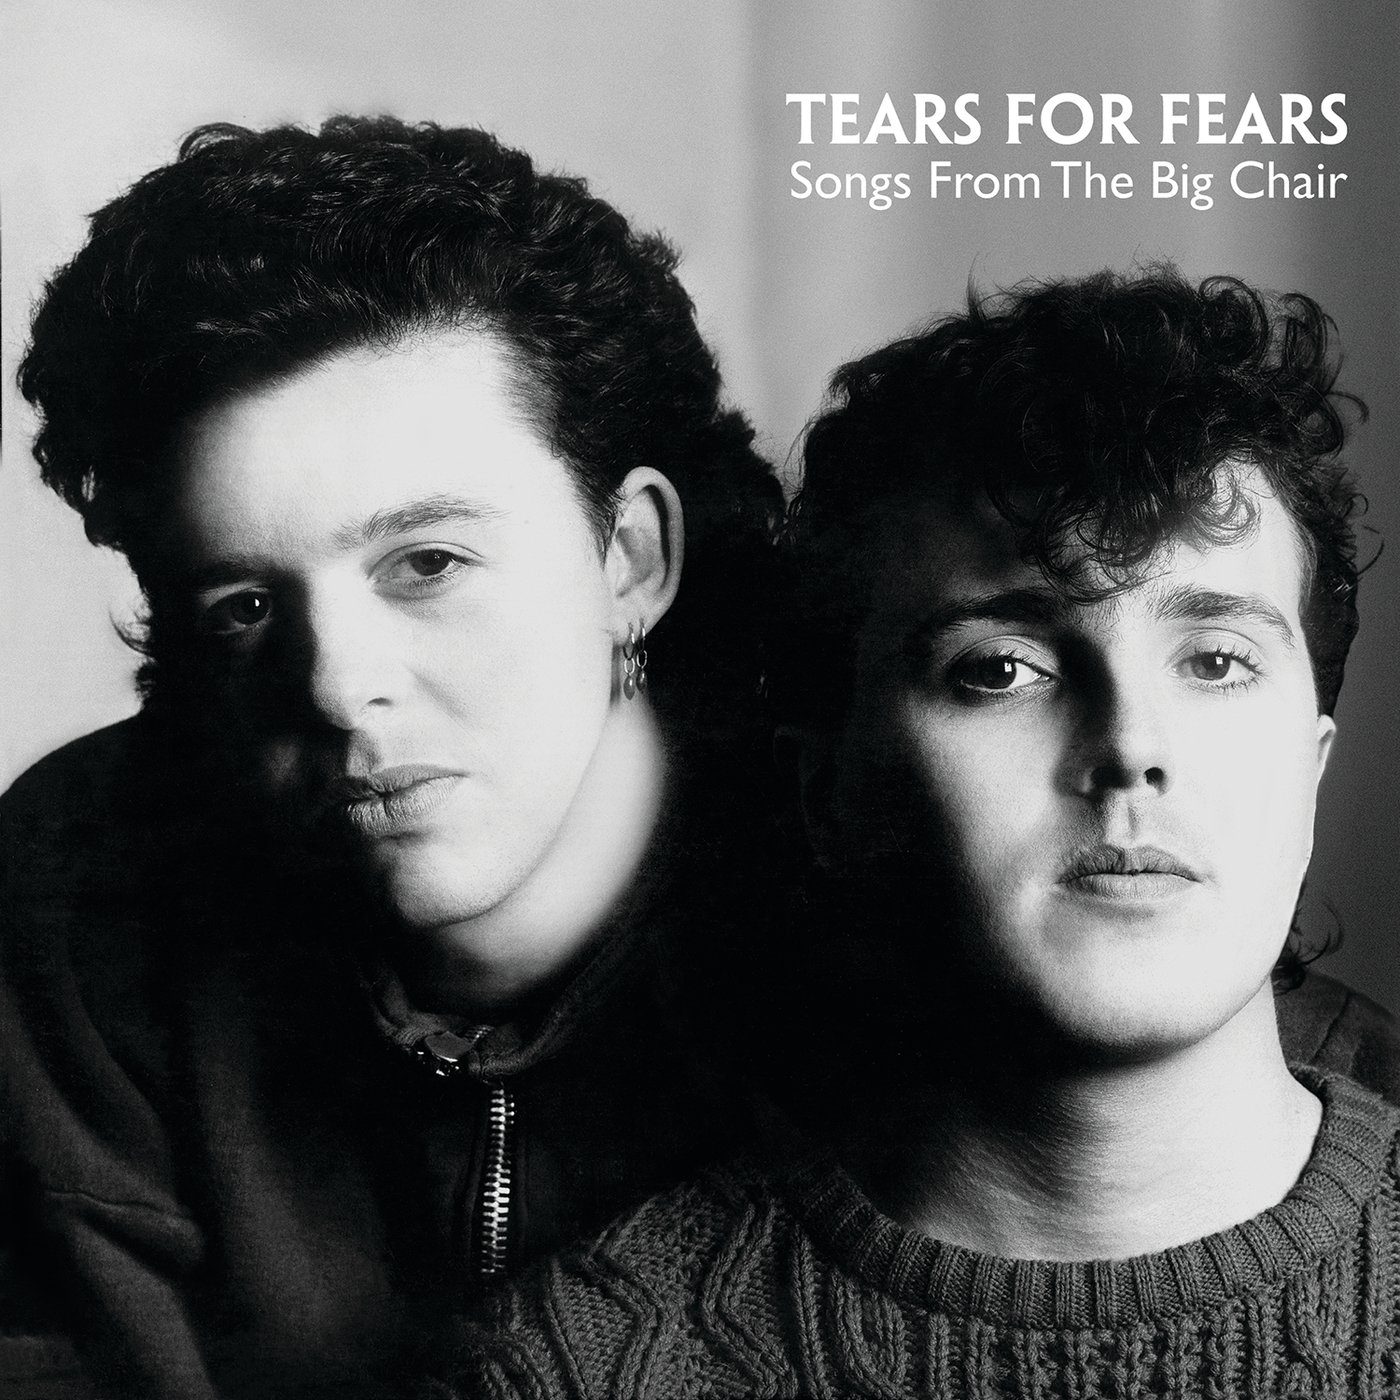 Canciones Traducidas: Everybody Wants to Rule the World – Tears for Fears